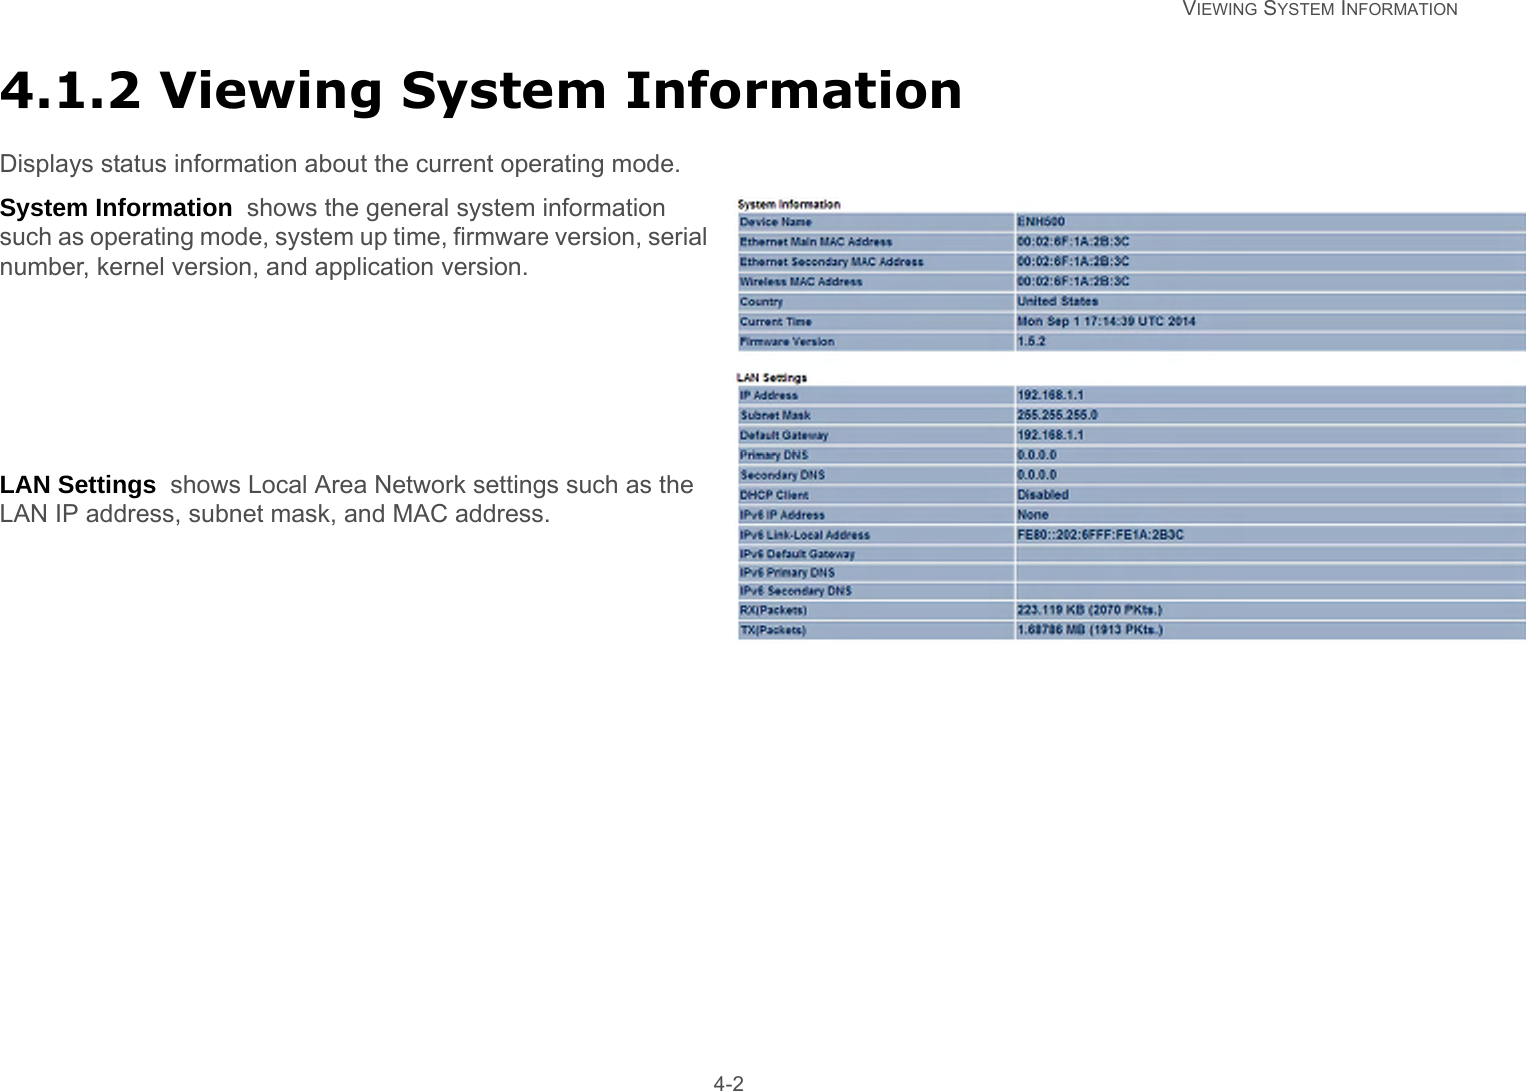   VIEWING SYSTEM INFORMATION 4-24.1.2 Viewing System InformationDisplays status information about the current operating mode.System Information  shows the general system information such as operating mode, system up time, firmware version, serial number, kernel version, and application version.LAN Settings  shows Local Area Network settings such as the LAN IP address, subnet mask, and MAC address.